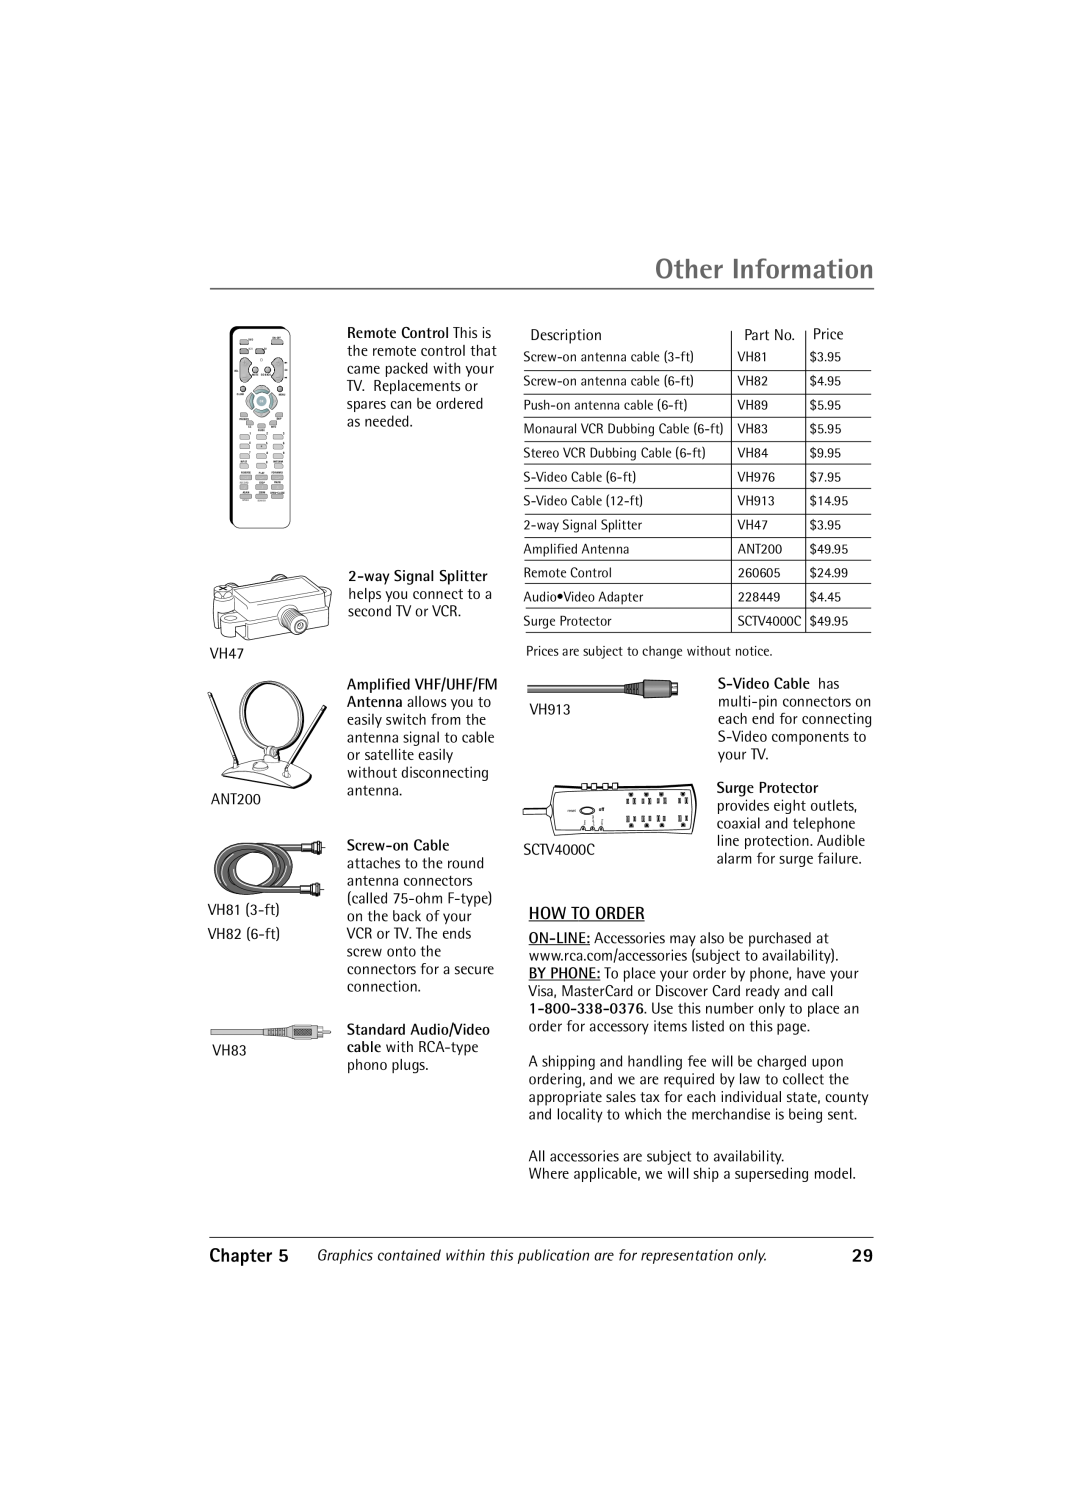 RCA 27R410T manual How To Order, Other Information, Chapter, Remote Control This is, way Signal Splitter 